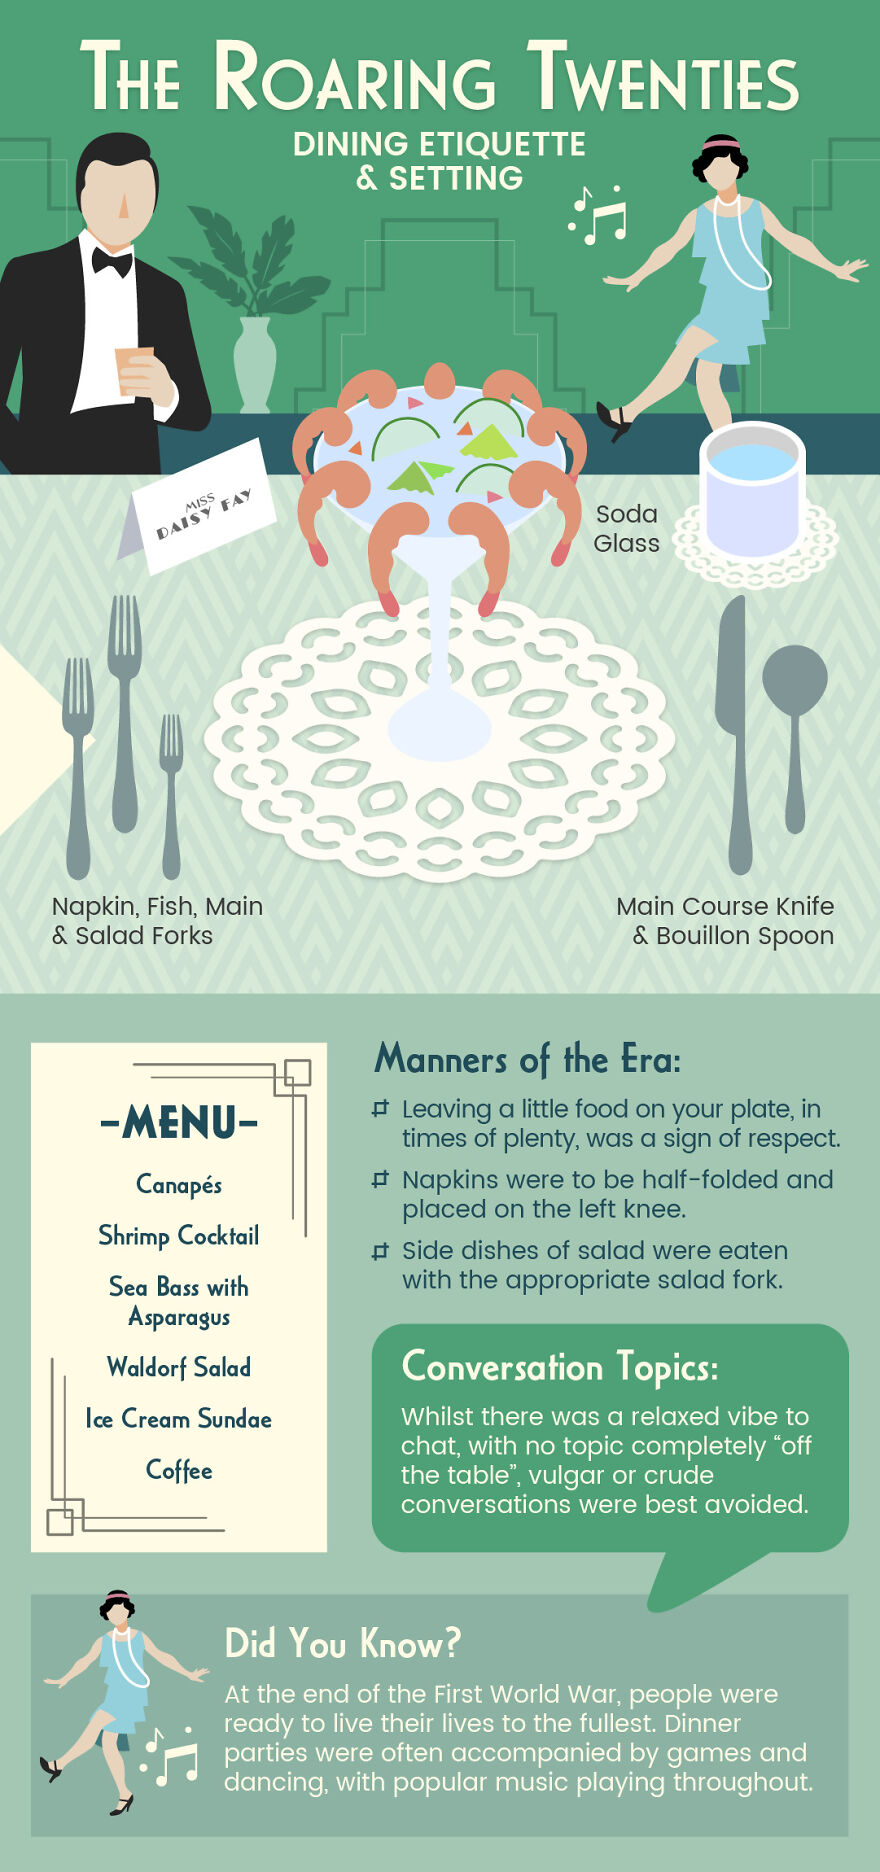 How British Dining Etiquette Has Changed Over The Years (6 Pics)